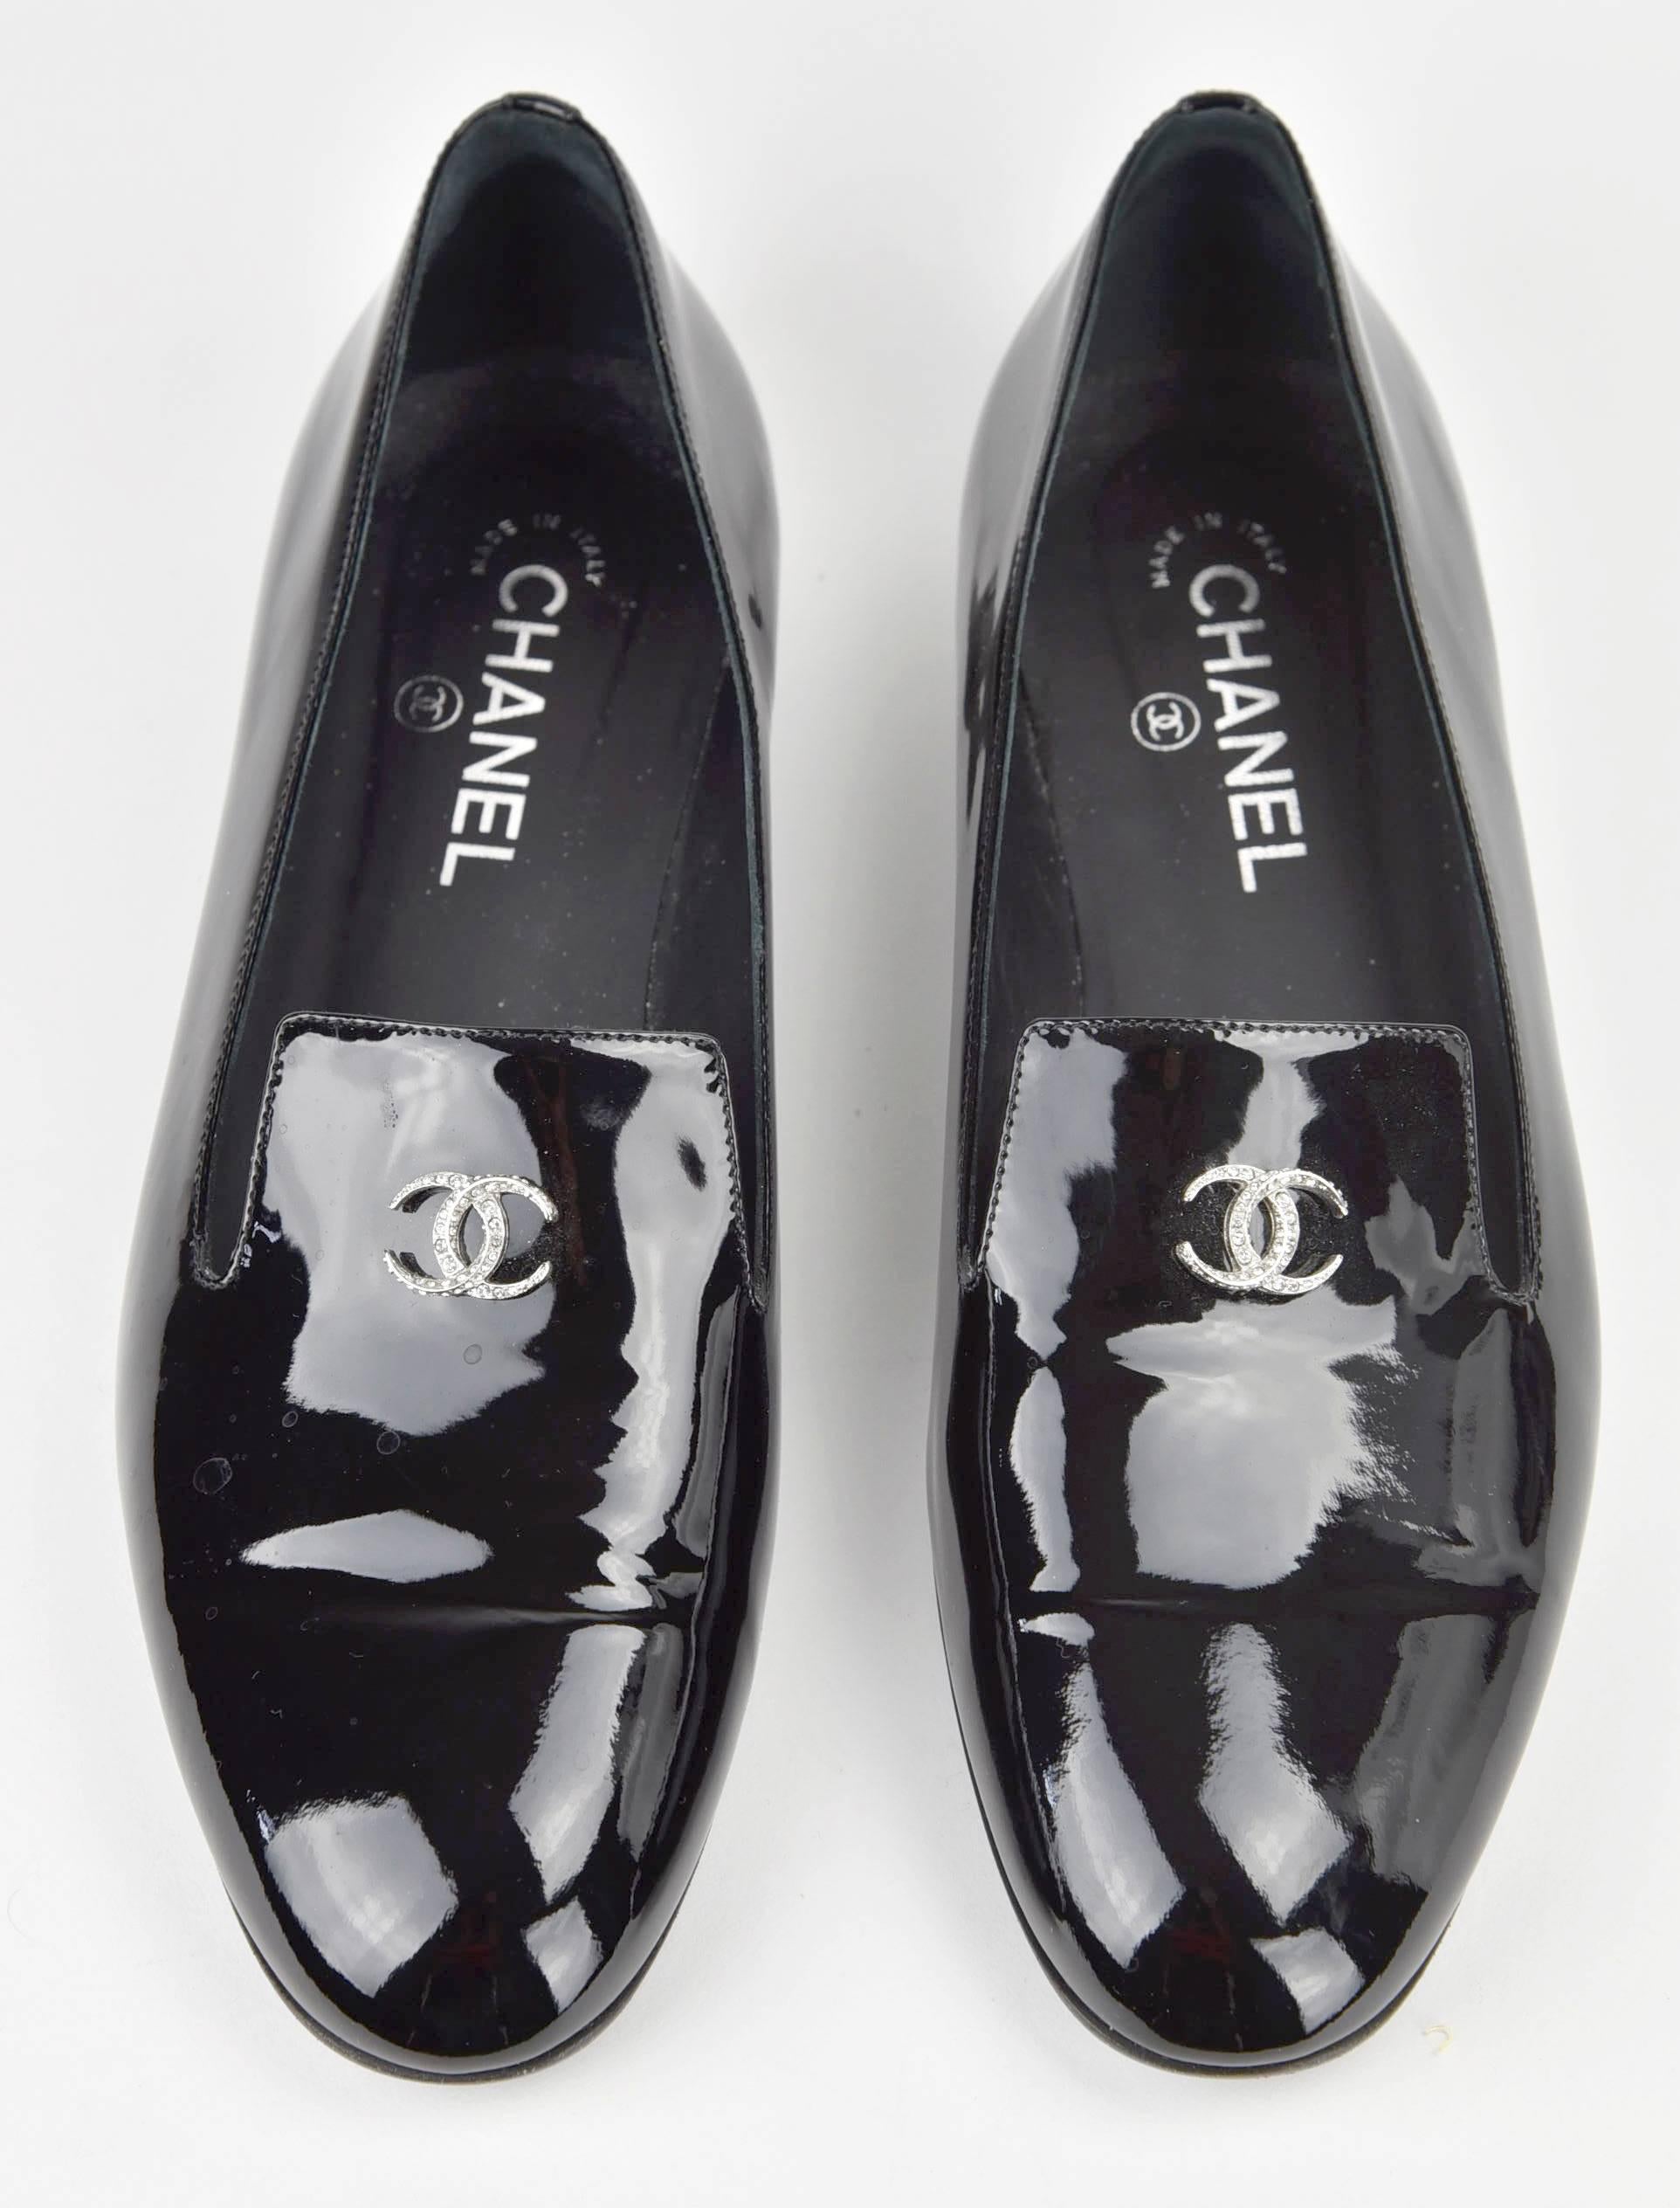 2015 Chanel Black Patent Leather Loafers with Rhinestone CC FR 40 1/2 1